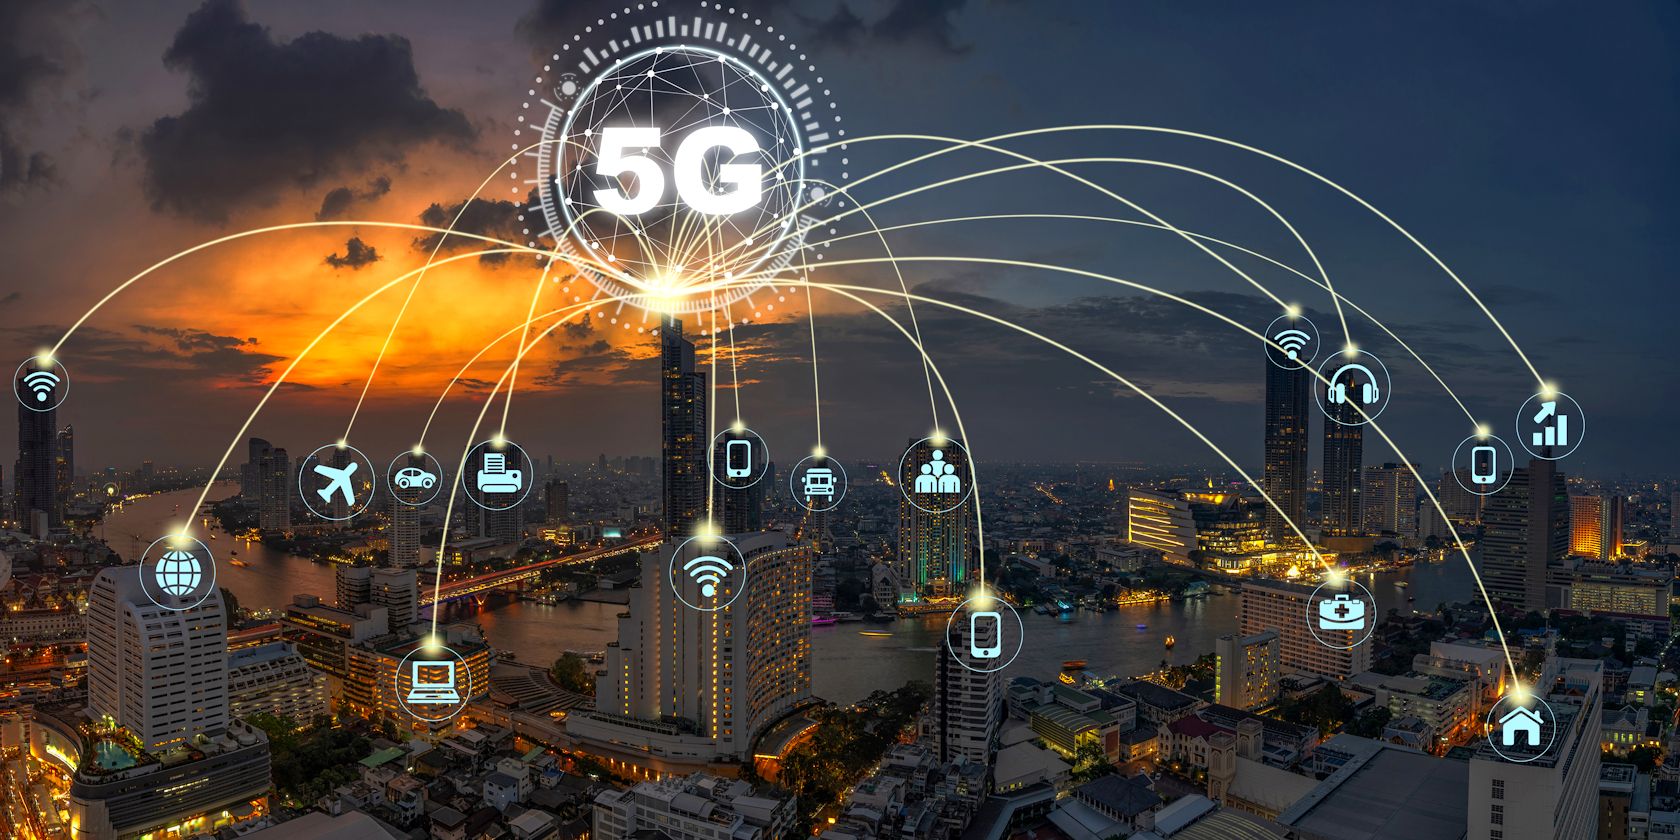 5g symbol broadcasting to devices across a city scape